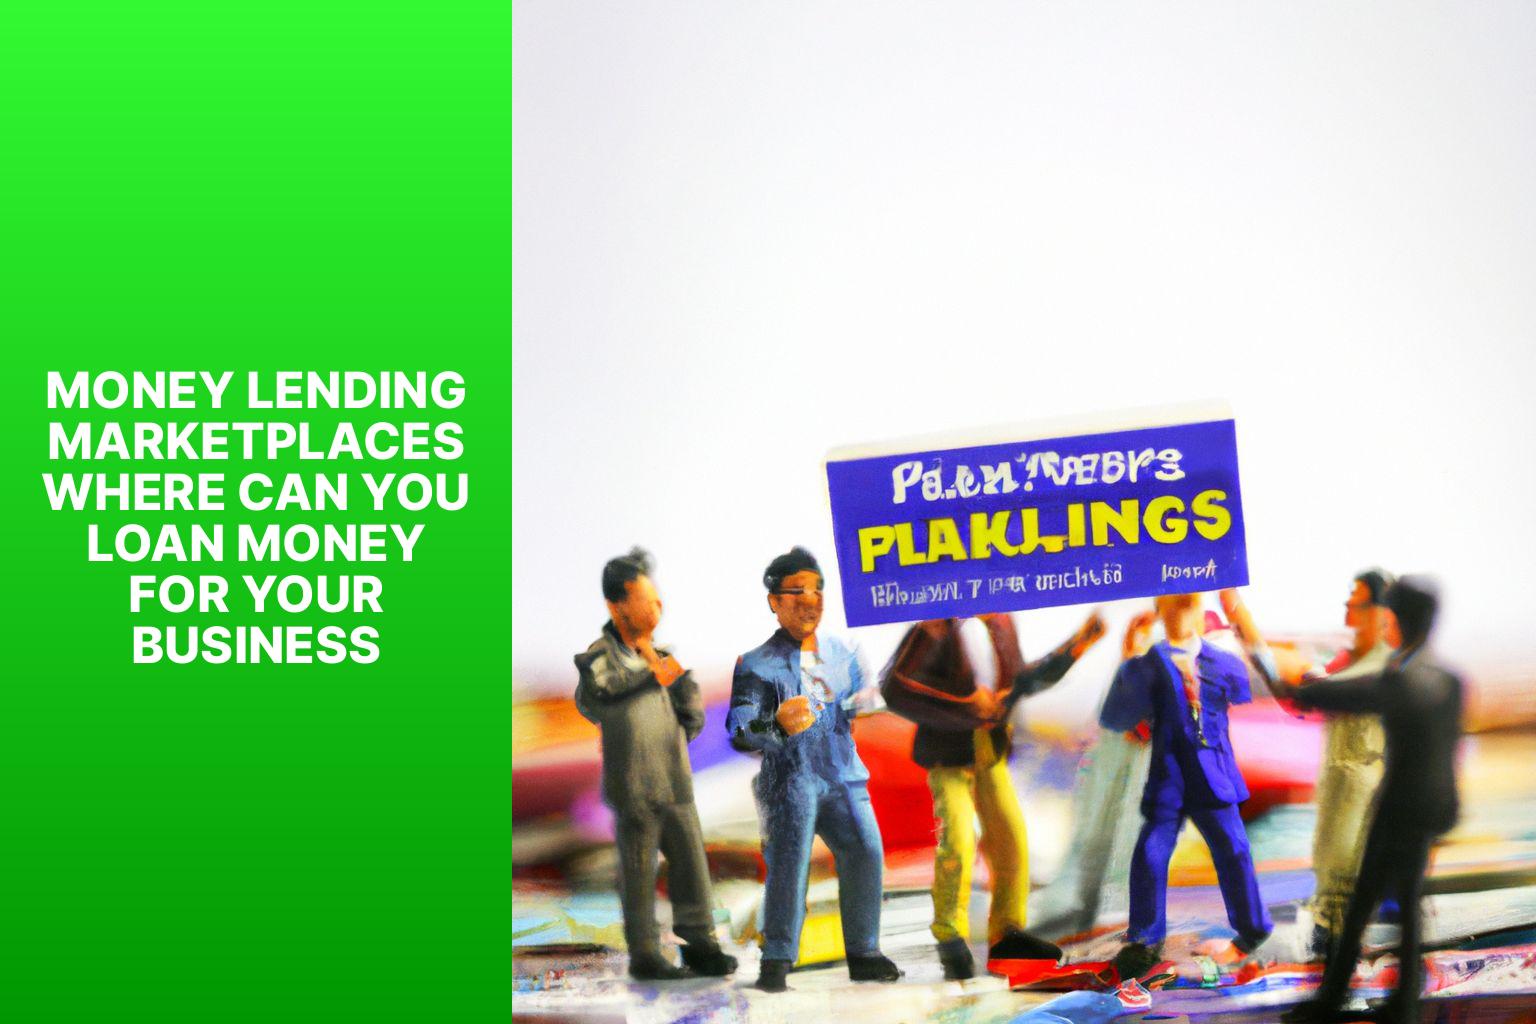 Money Lending Marketplaces Where Can You Loan Money for Your Business